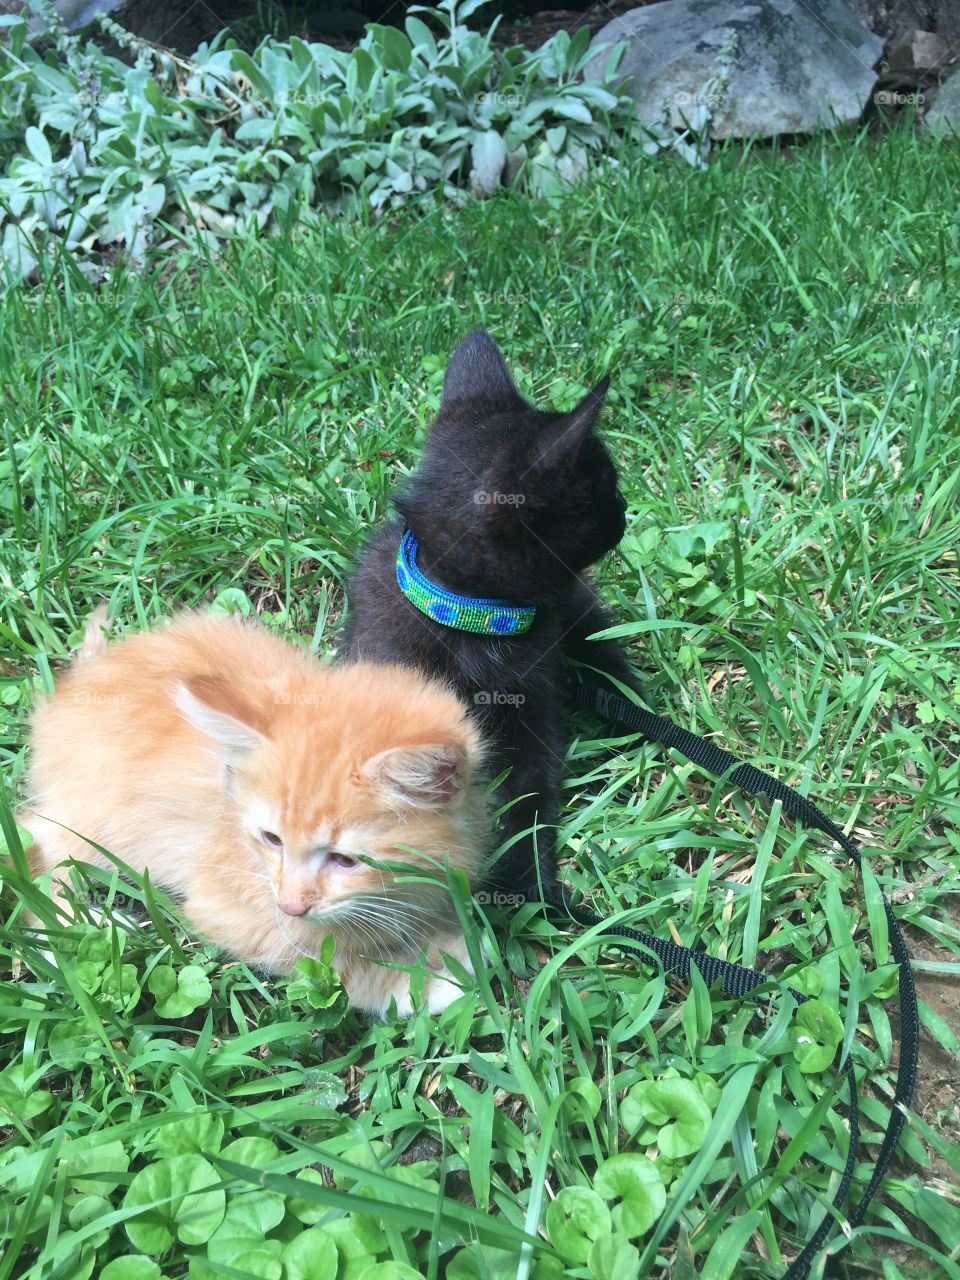 Kittens on a harness